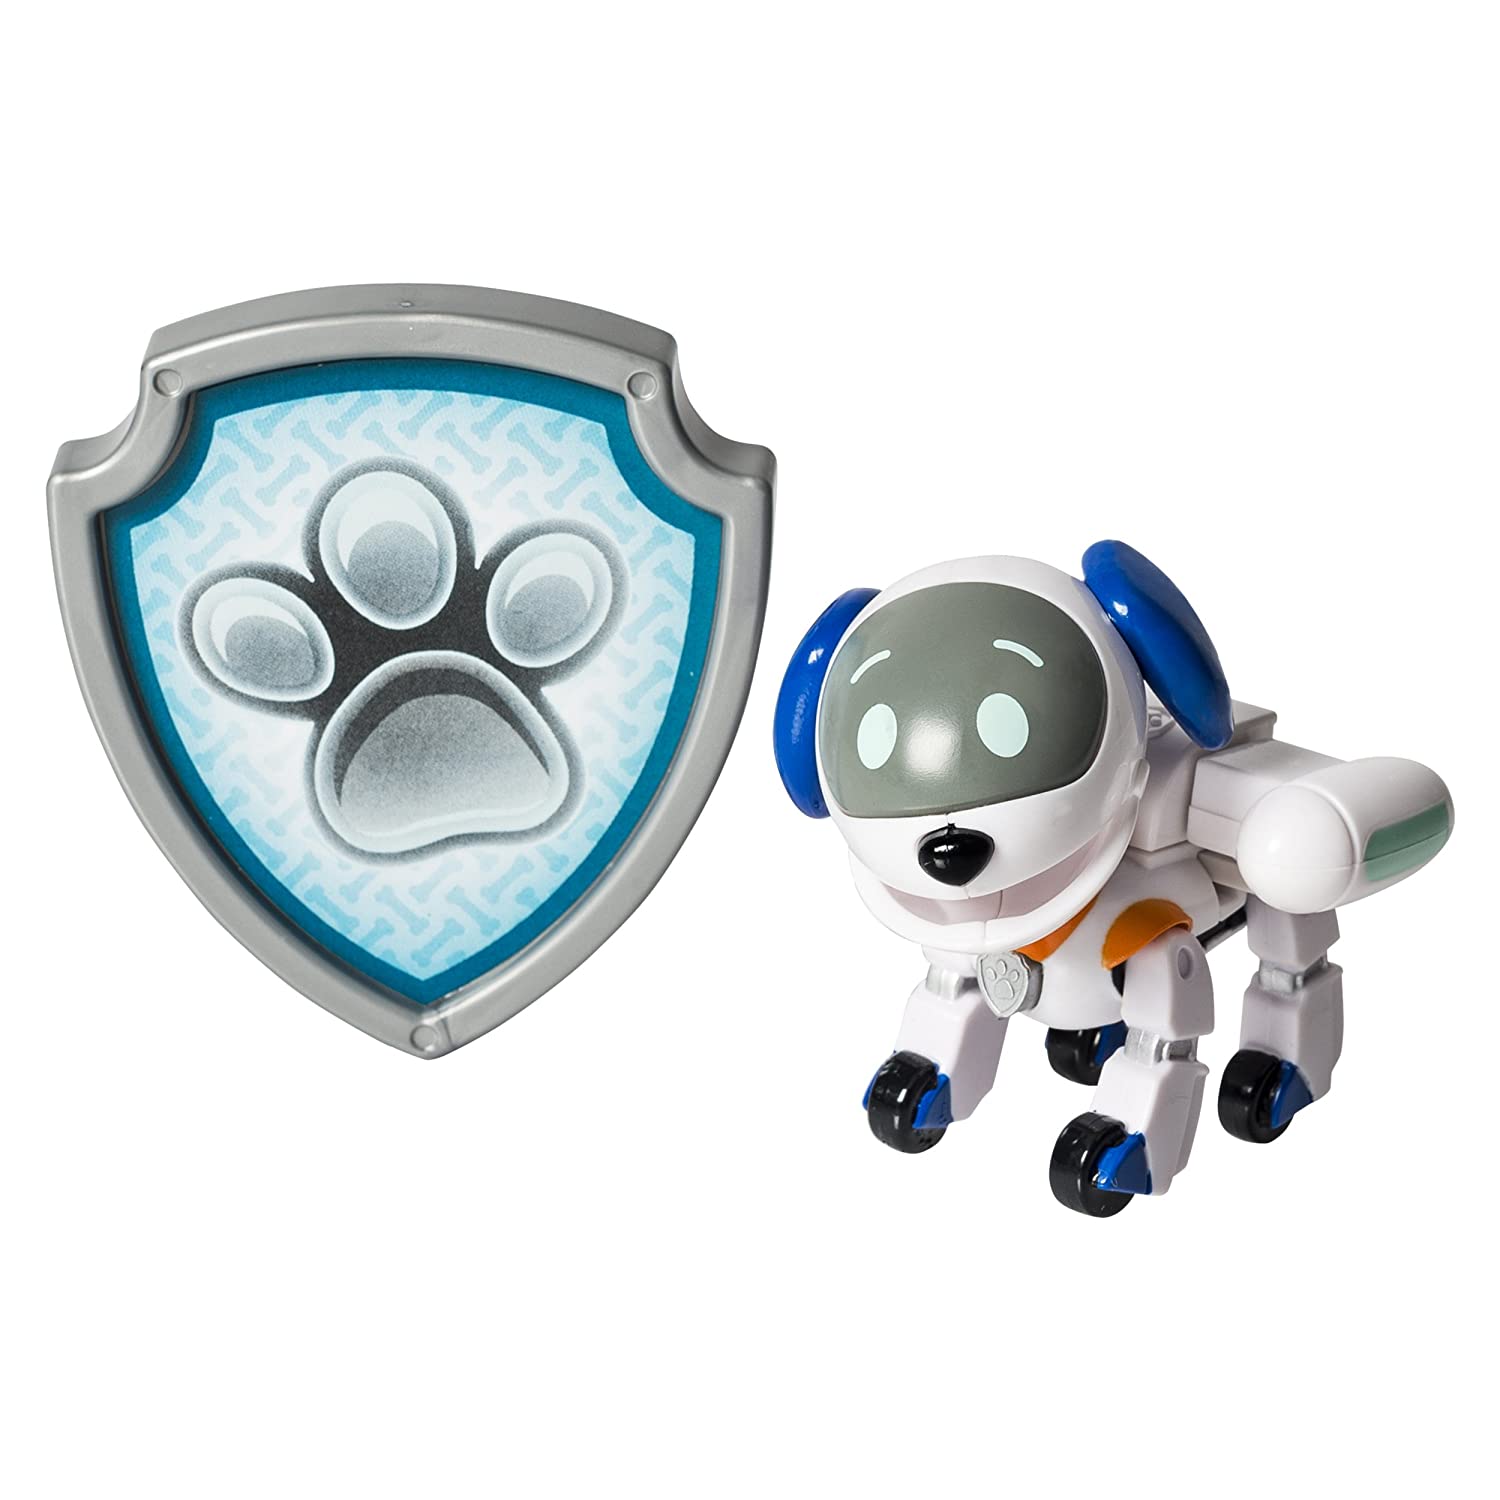 Top 9 Best Robot Pets for Kids Reviews in 2023 1